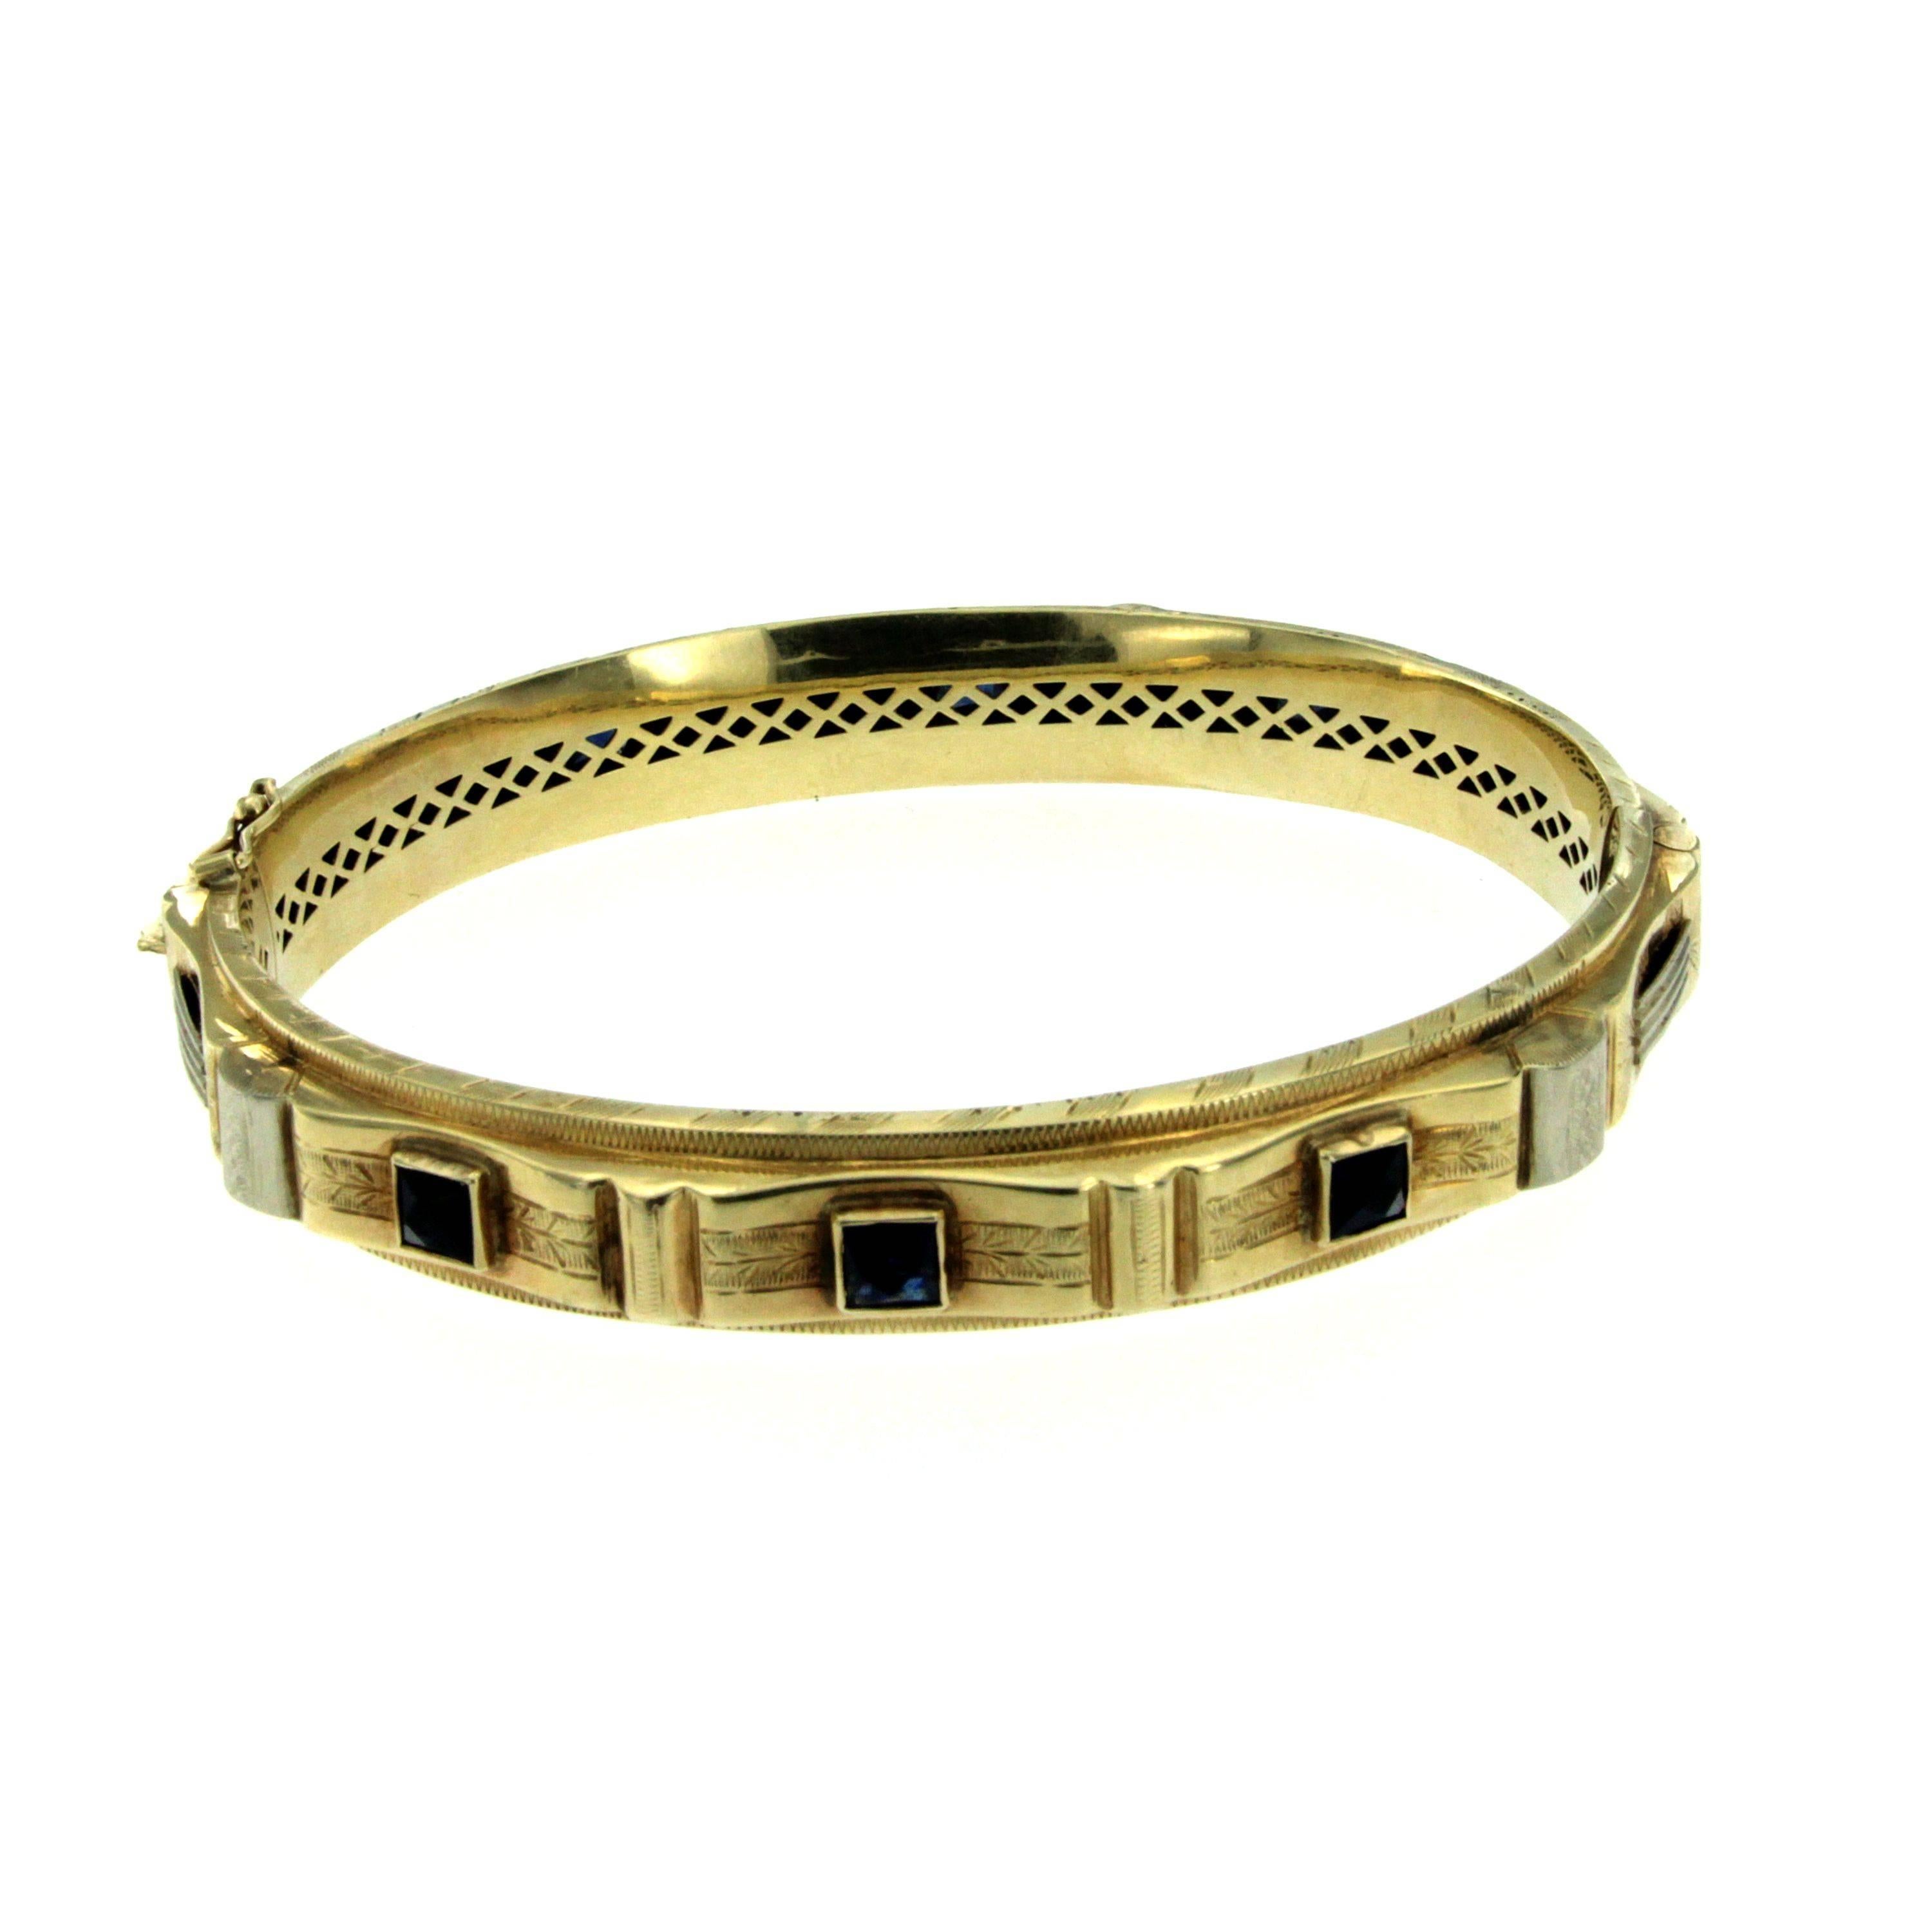 A fabulous authentic bangle bracelet adorned with approx. 6.50 ct of semiprecious tones, set in 12k yellow gold.
Hallmarked with Lictorian Fascist Emblem (Fasces Lictorii), circa 1930

The bracelet is 1cm (0.39 in) wide, with an inner diameter of